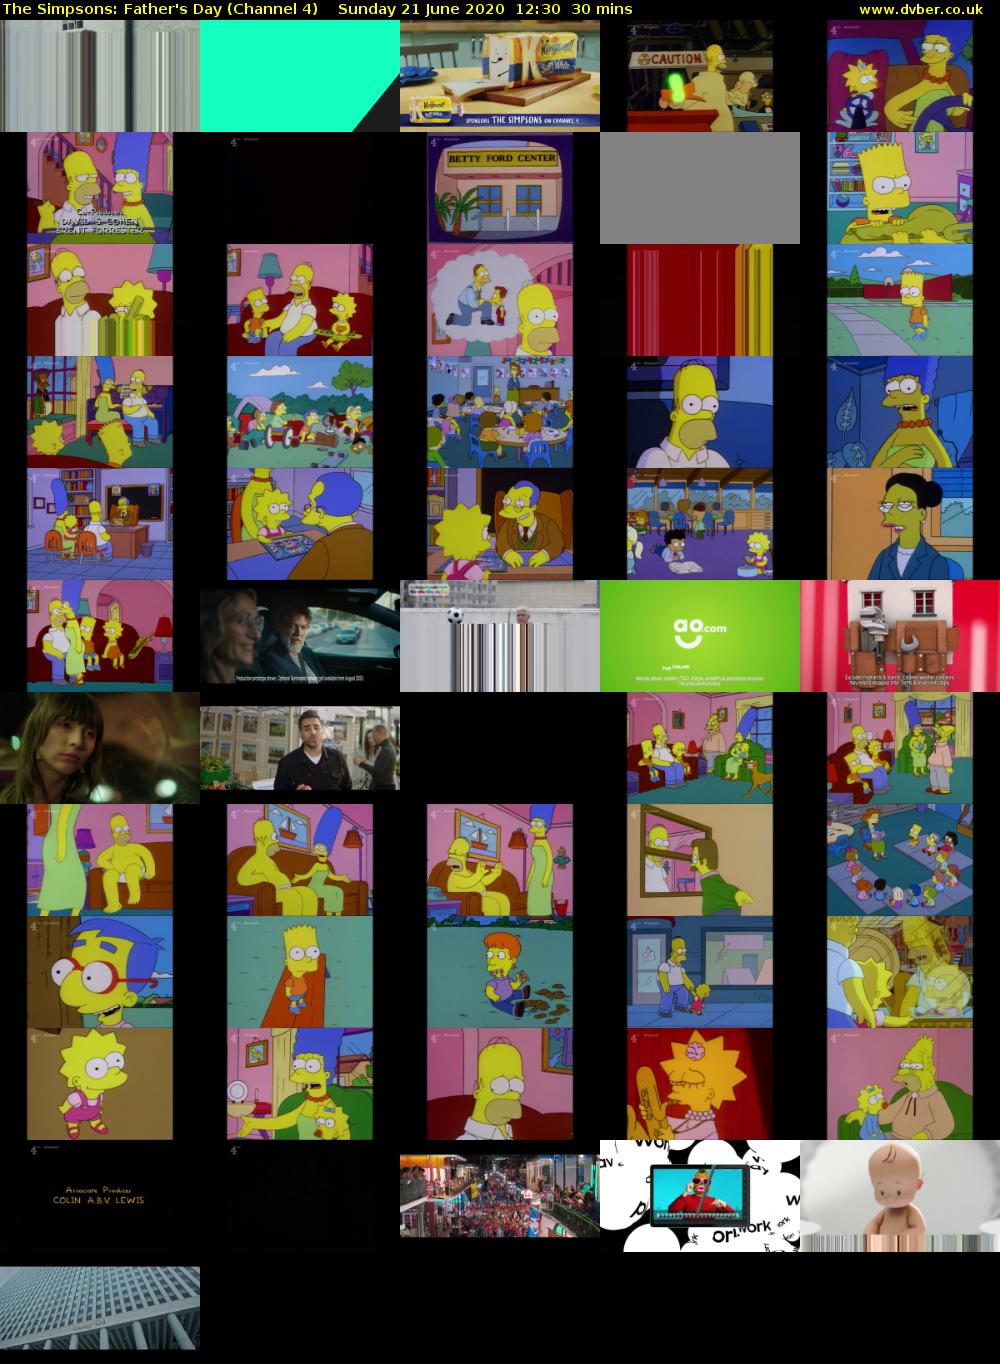 The Simpsons: Father's Day (Channel 4) Sunday 21 June 2020 12:30 - 13:00